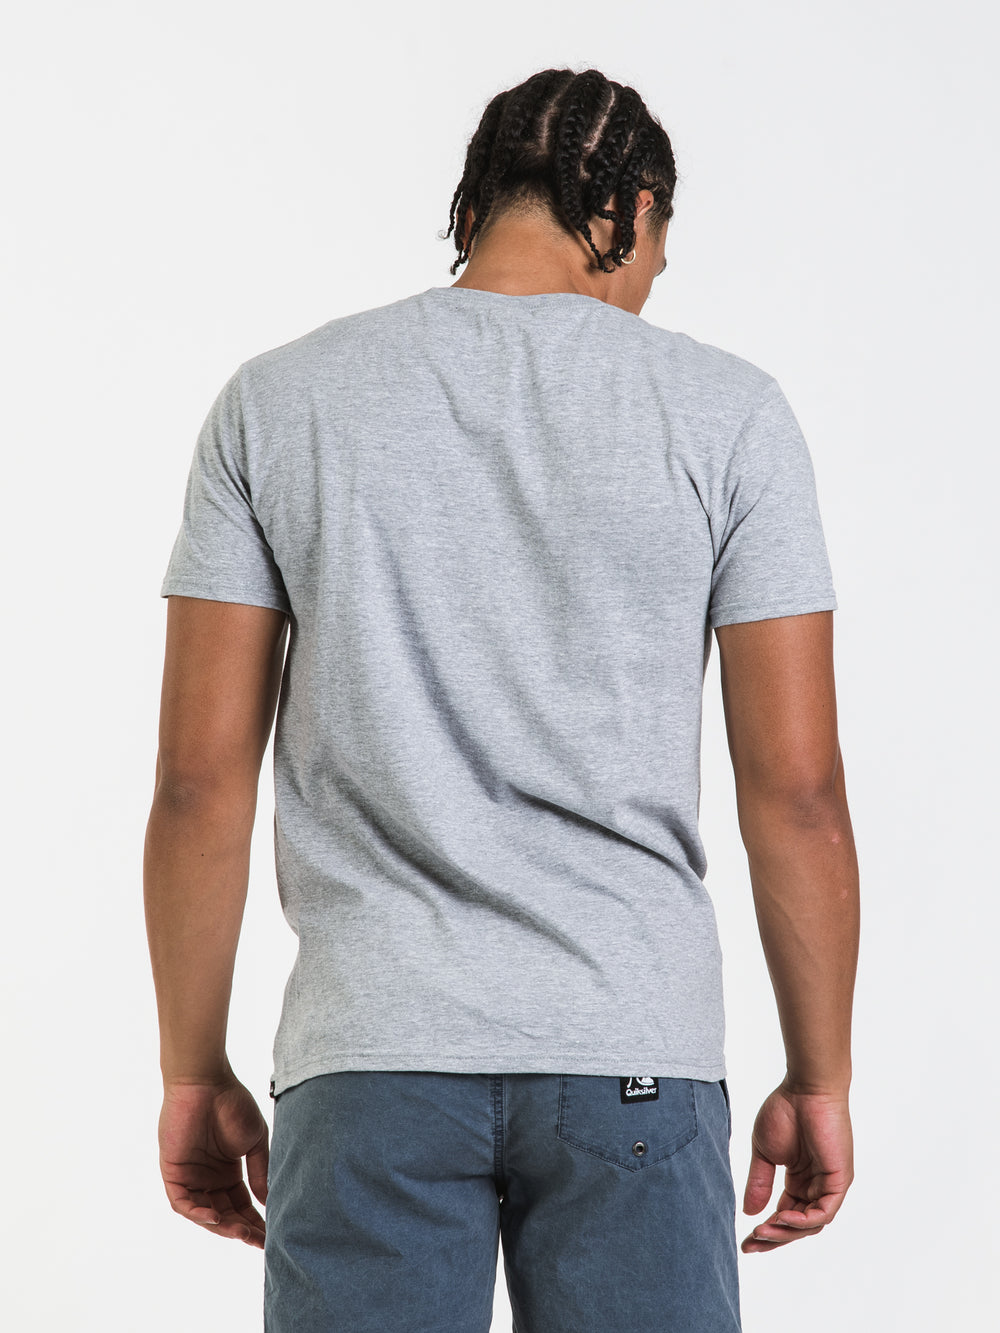 QUIKSILVER LINED UP T-SHIRT - CLEARANCE